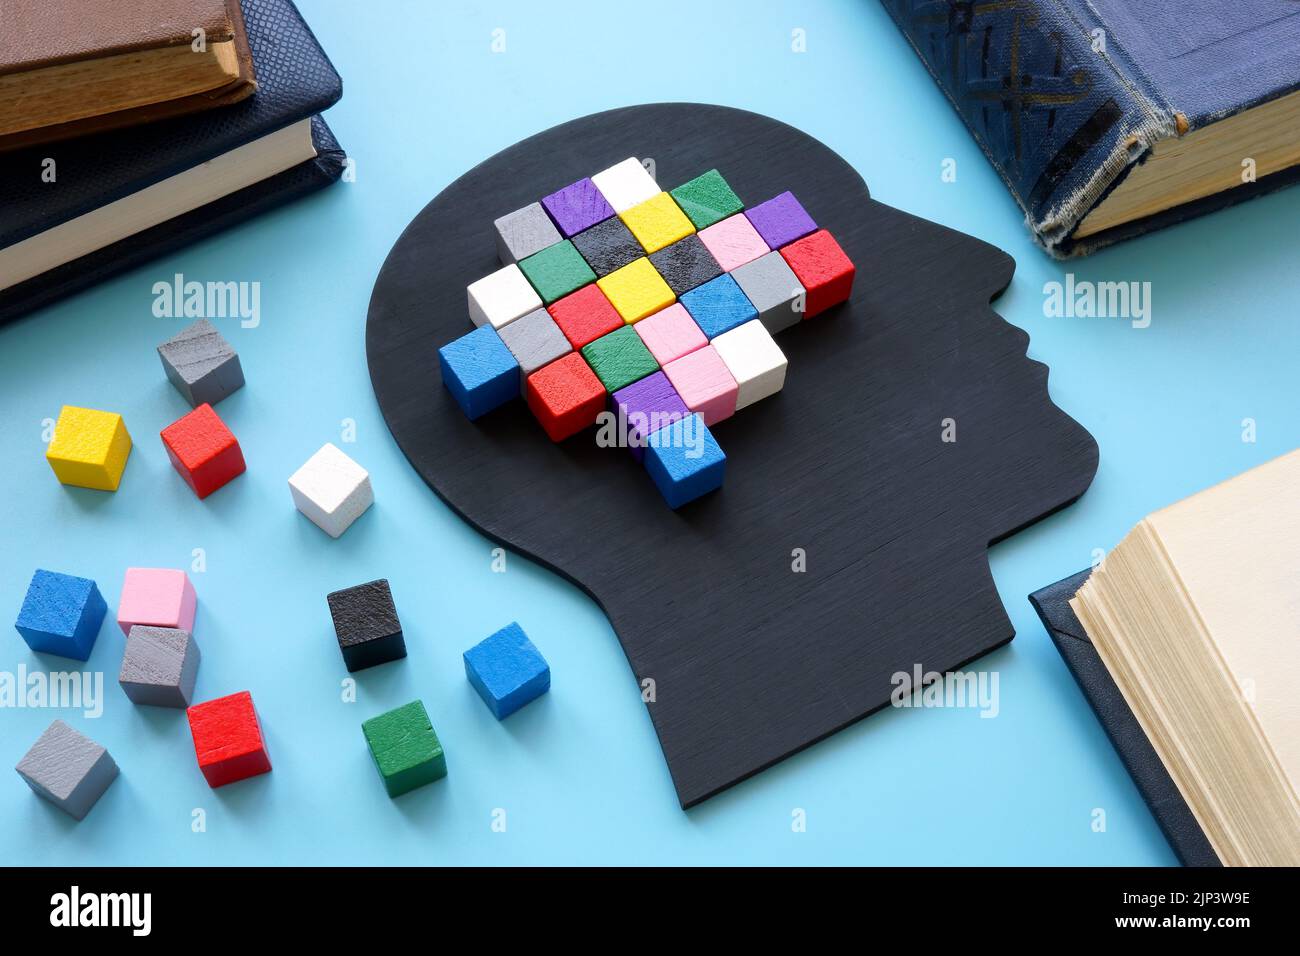 Multicolored cubes in the form of a brain as a symbol creative mind. Stock Photo